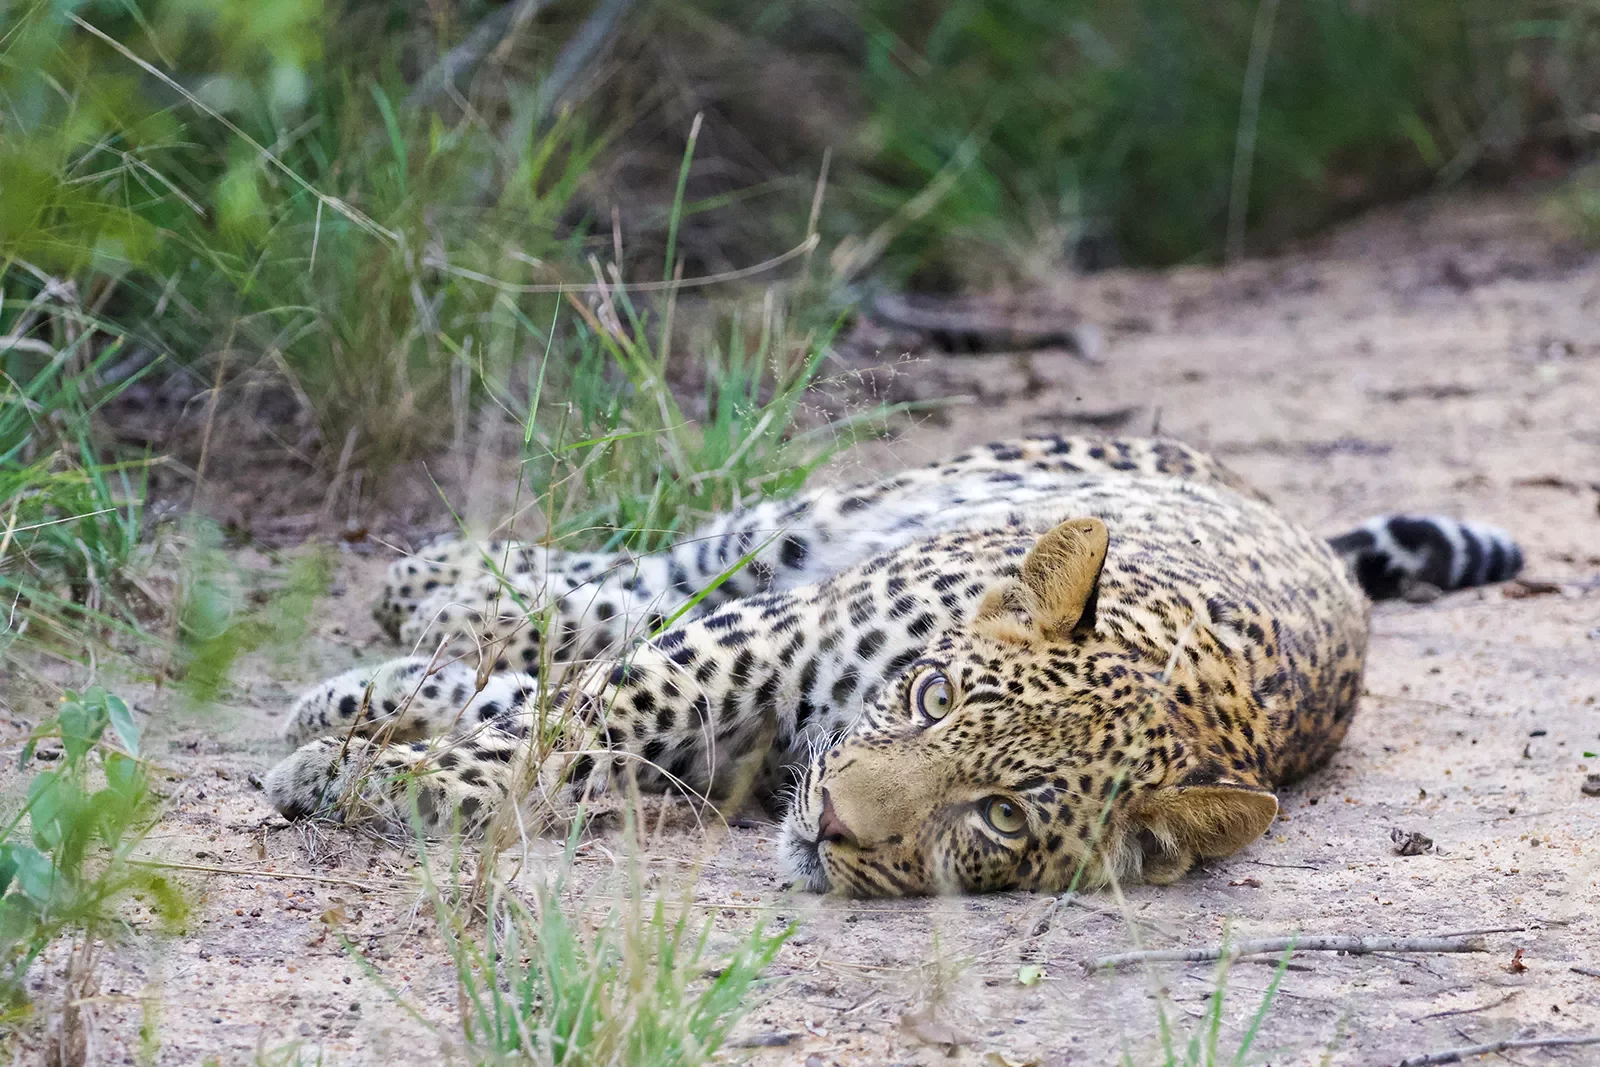 Leopard laying on its side, looking at camera